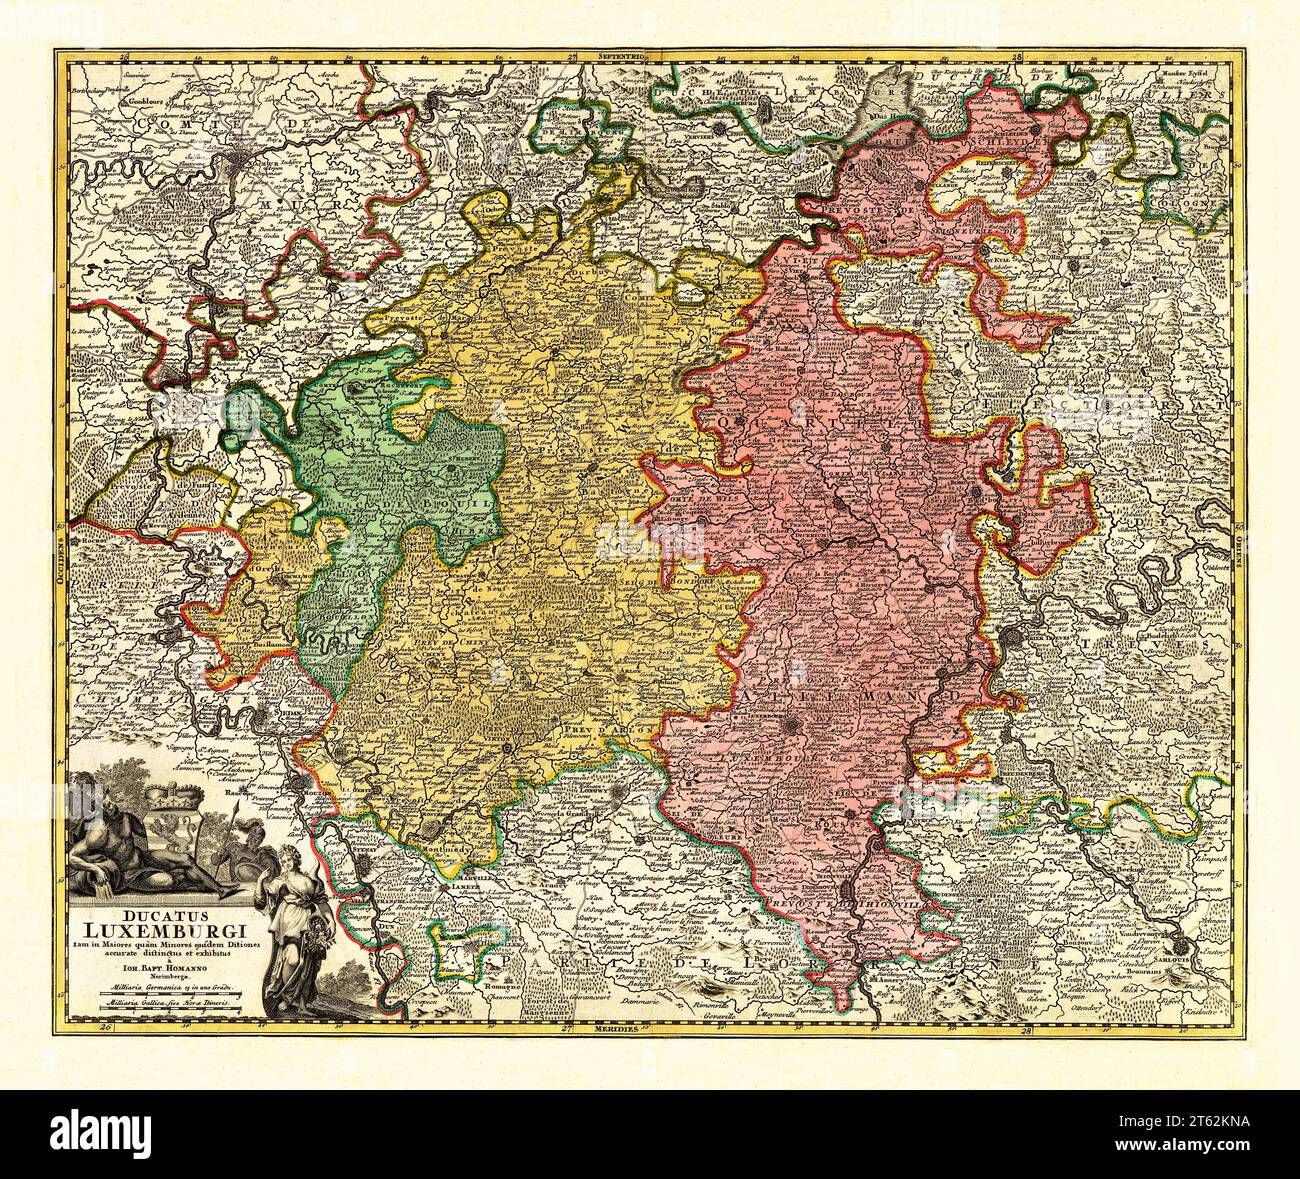 Old map of Luxembourg. By Homann, publ. 18th century. Stock Photo